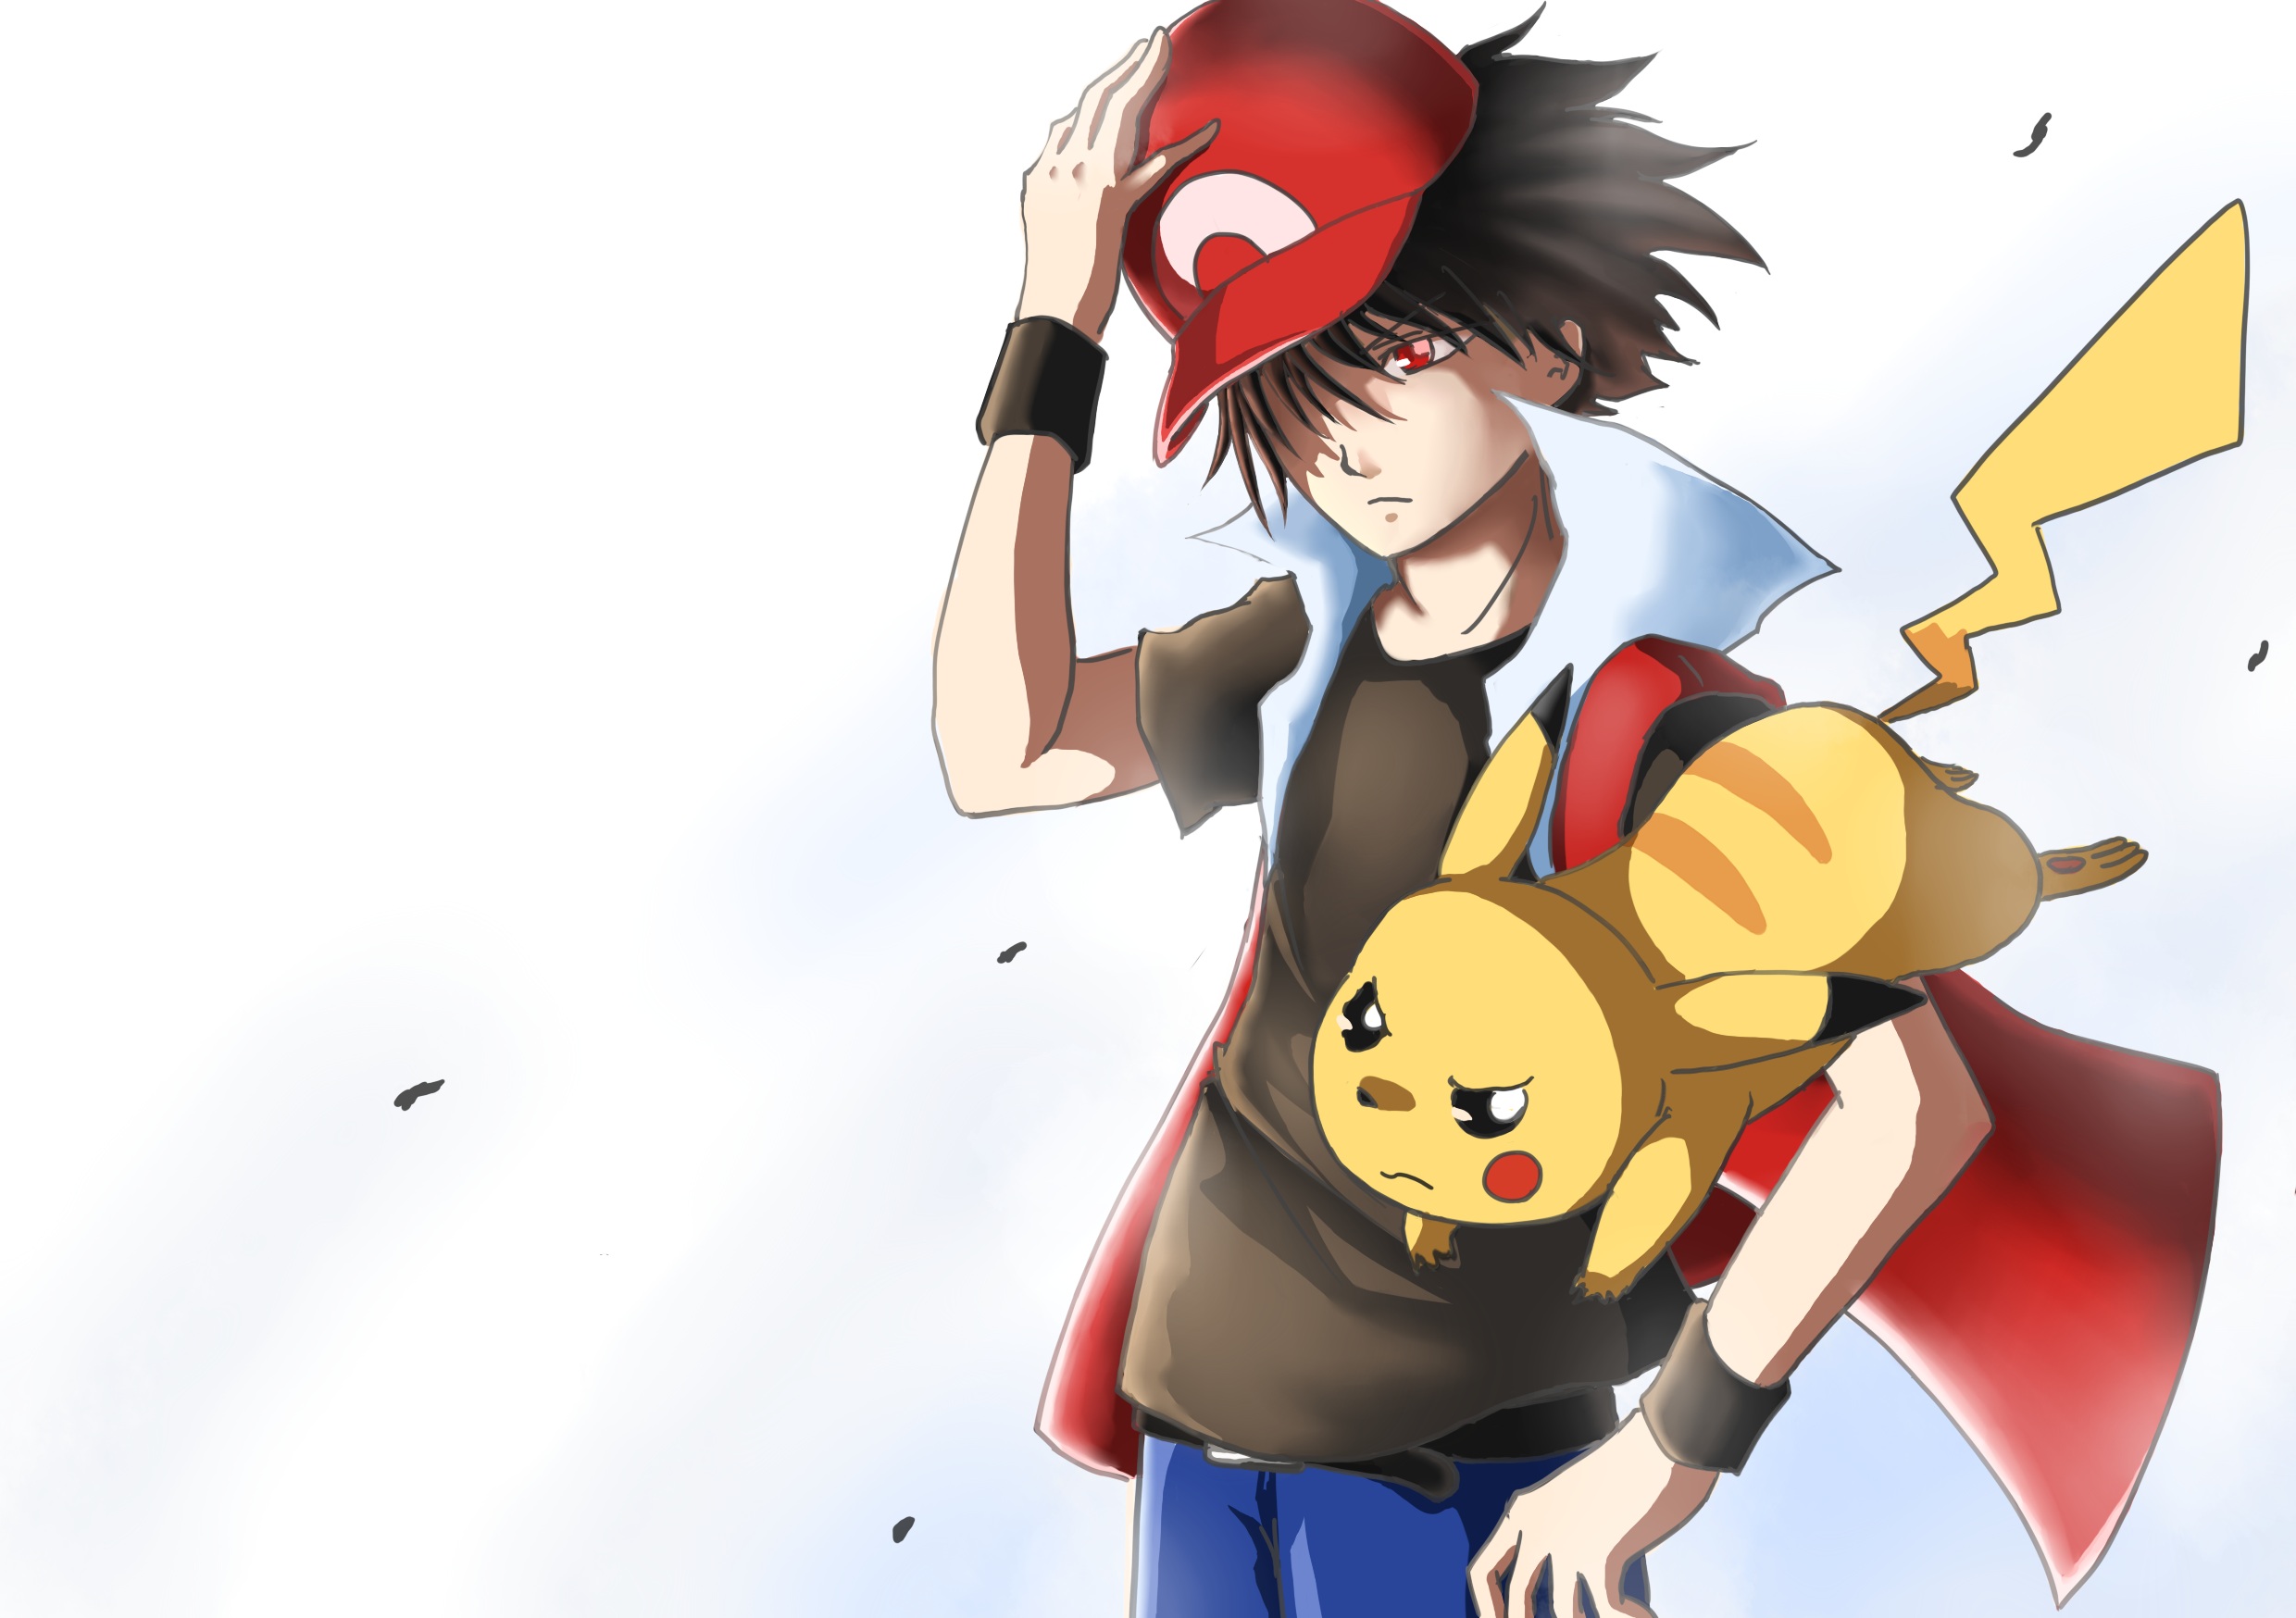 Pokemon red an blue Wallpapers Download